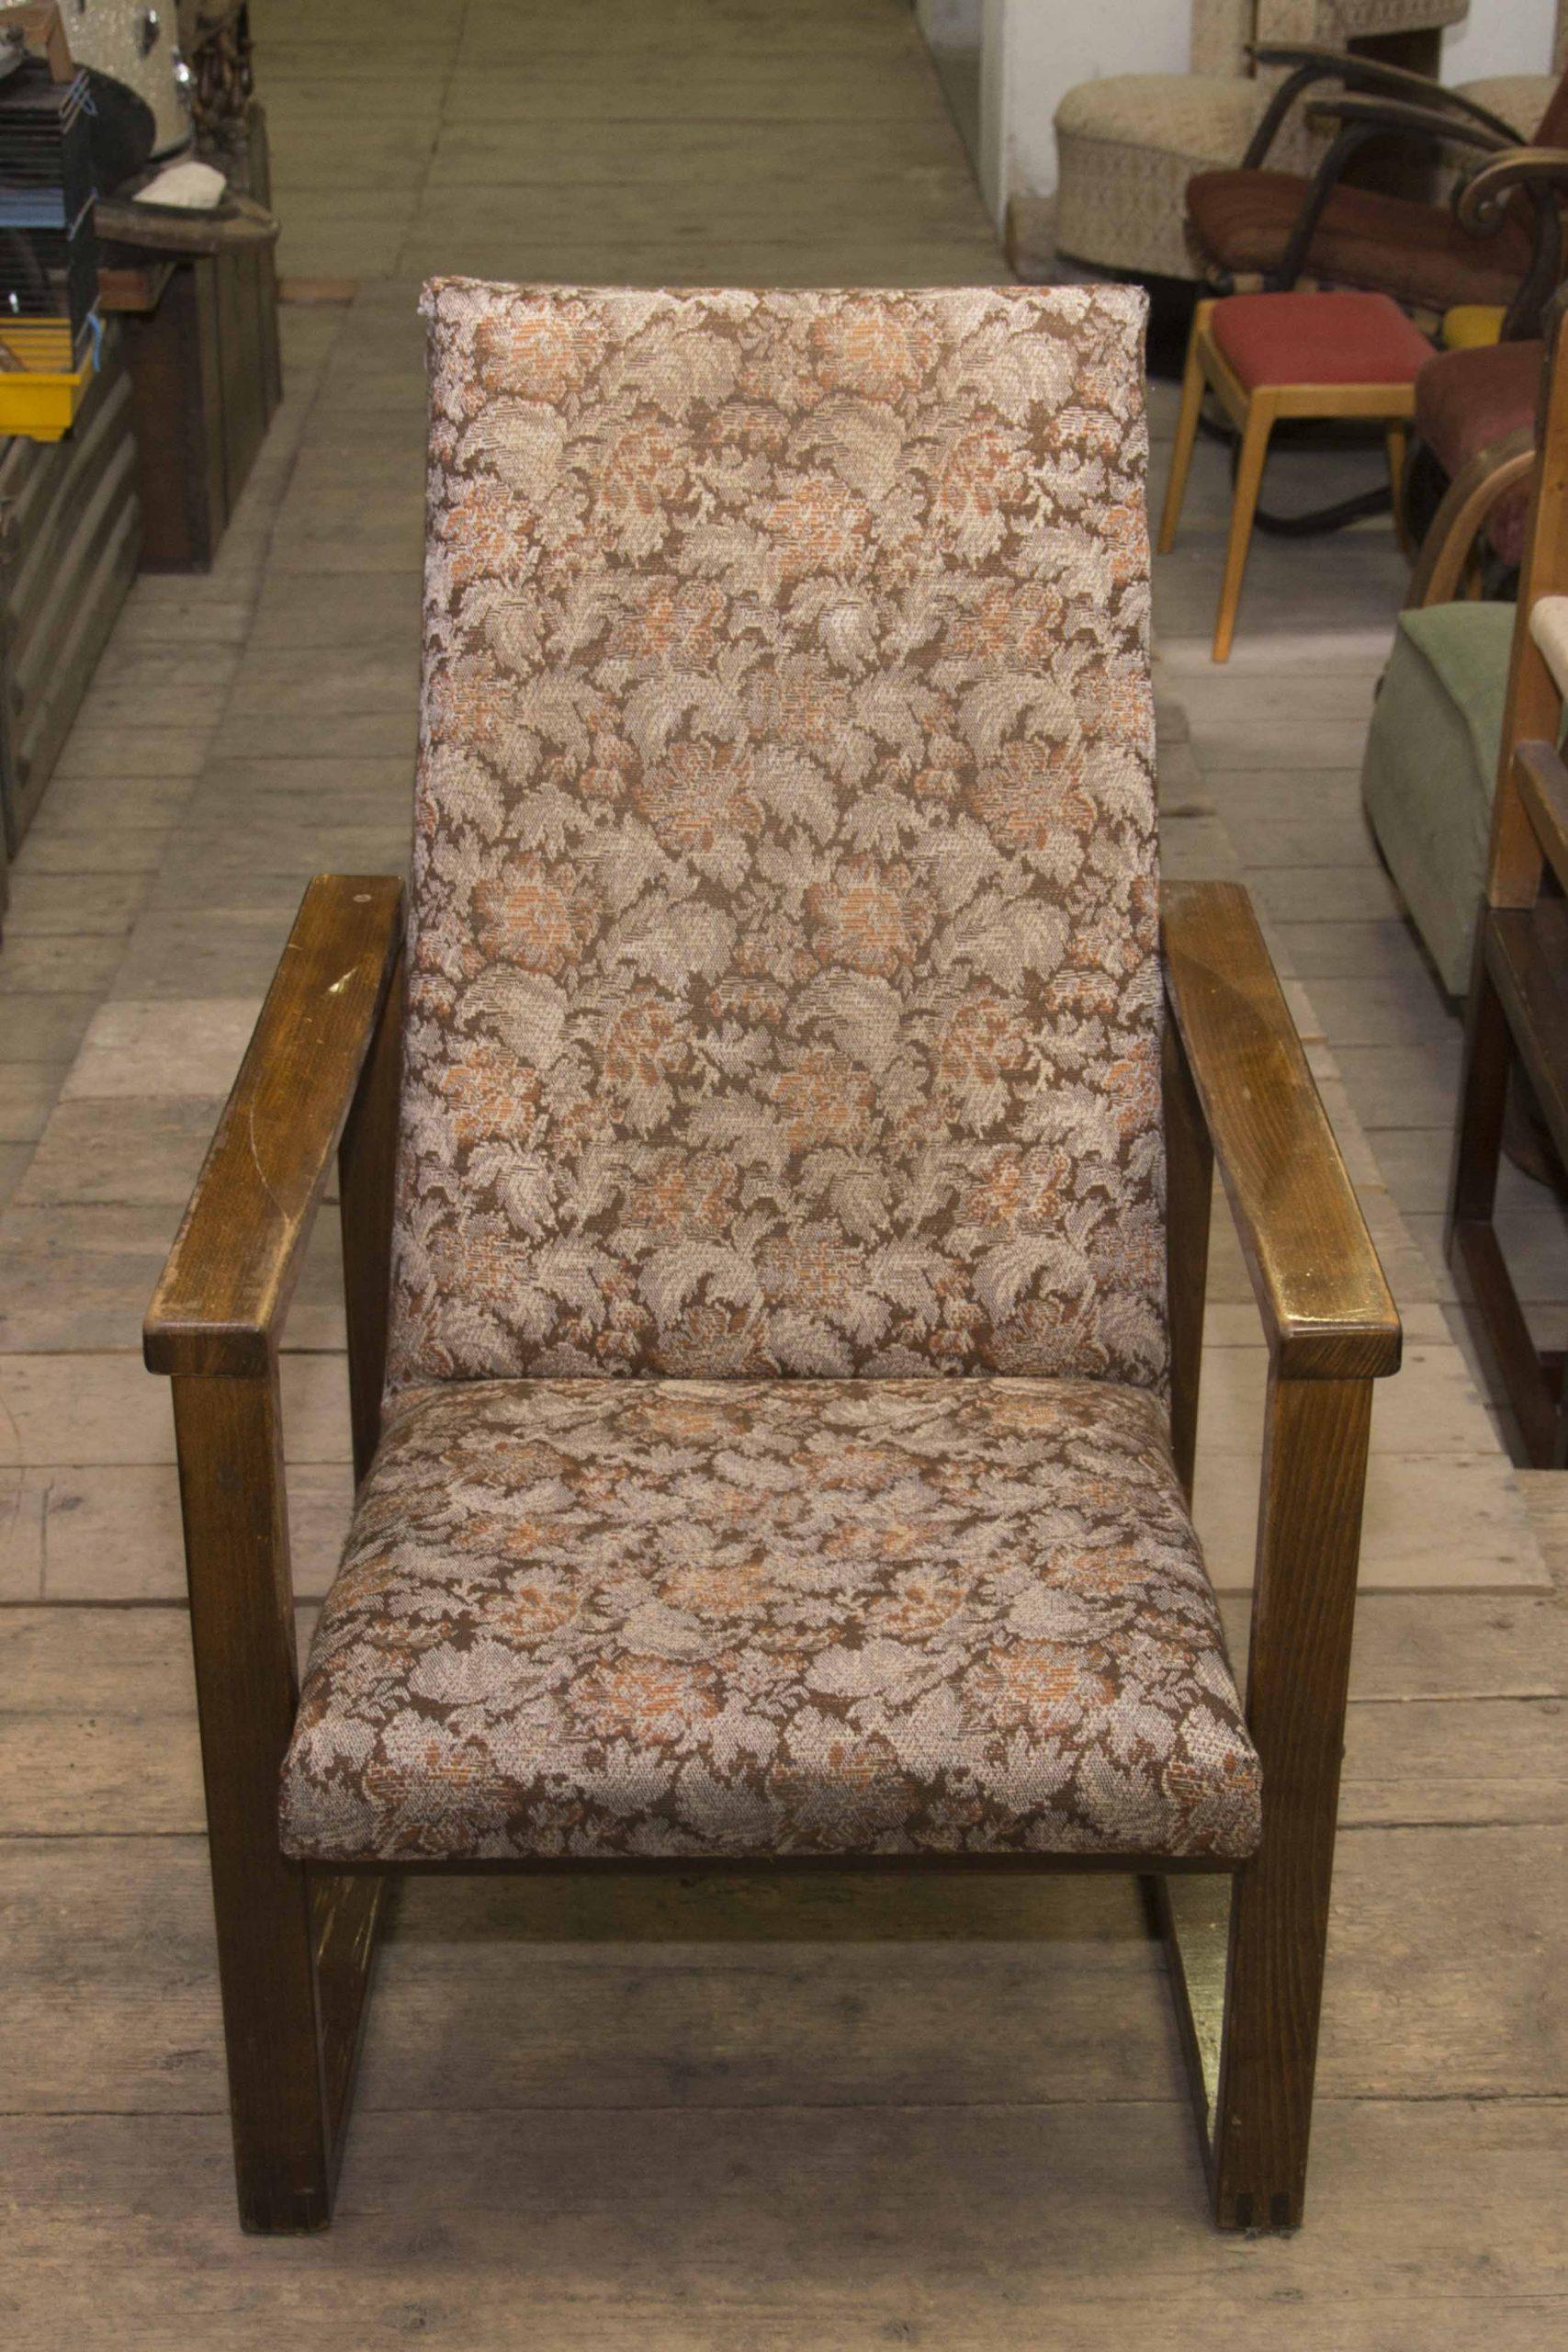 Vintage scandinavian style armchair, made in the 1980´s in the former Czechoslovakia. The structure is made of beech wood, the chairs has an original upholstery. In preserved vintage condition, showing signs of age and using.